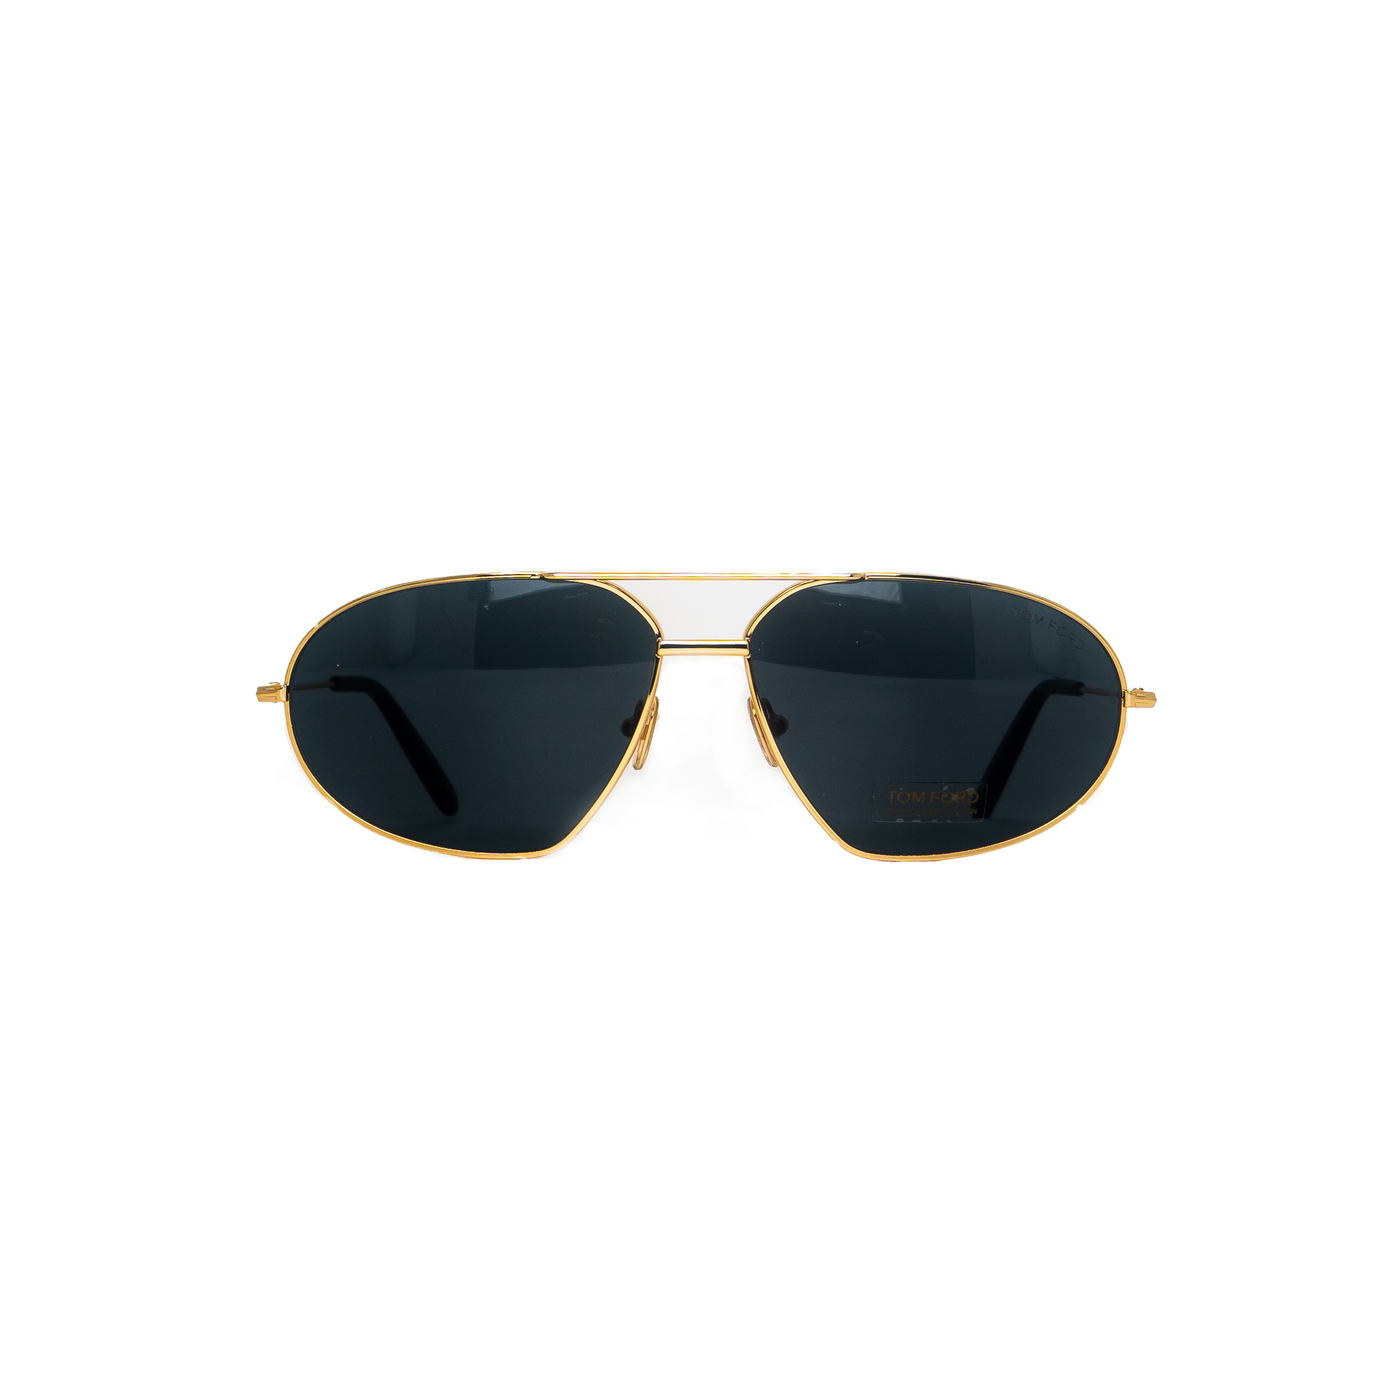 Tom Ford Sunglasses | FT077130A63 - Vision Express Optical Philippines